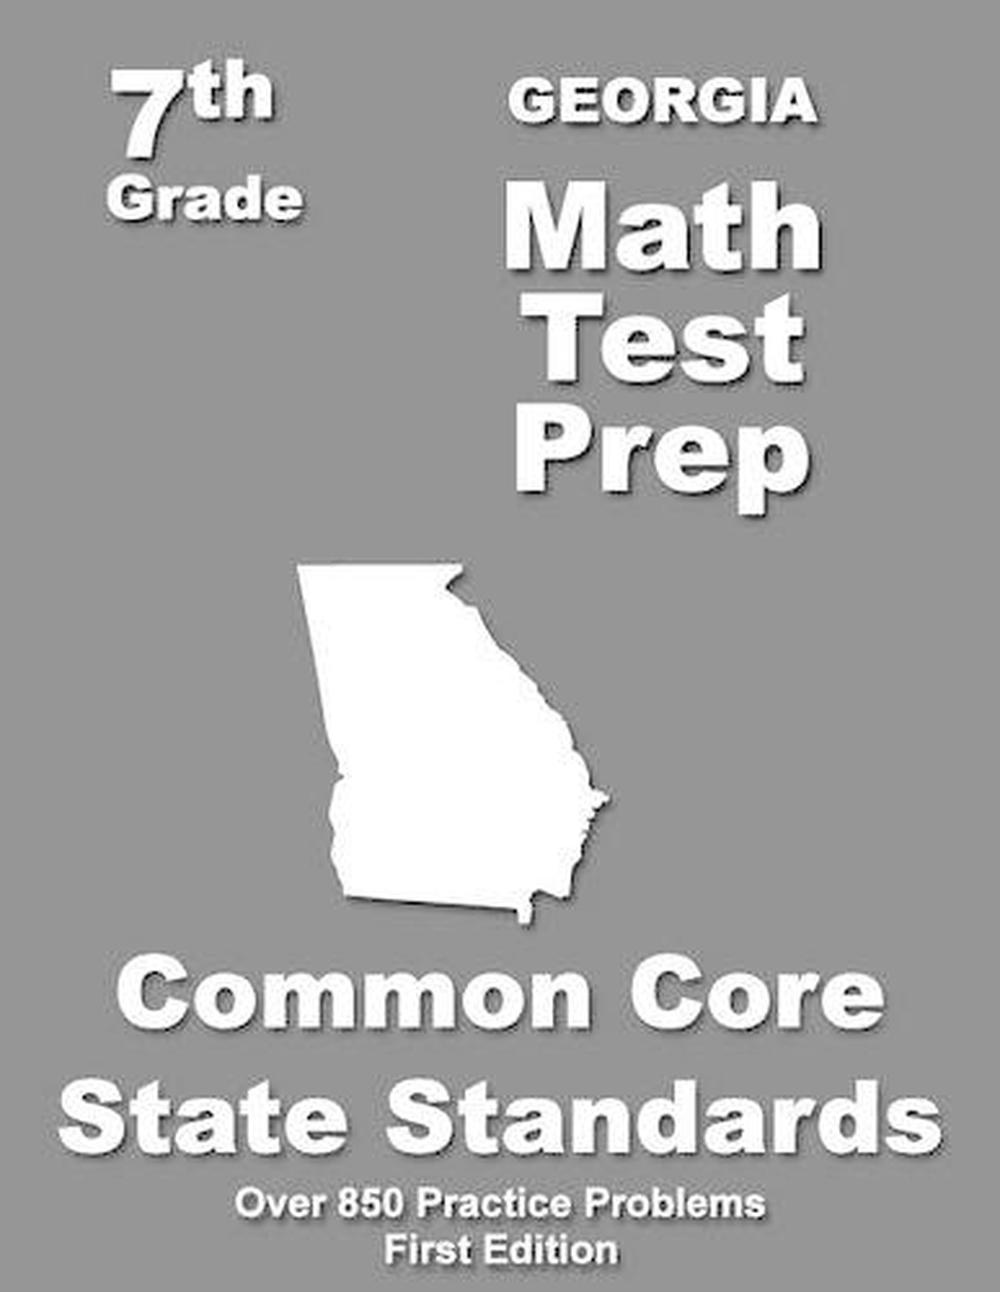 Georgia 7th Grade Math Test Prep Common Core Learning Standards By Teachers Tr 9781508796787